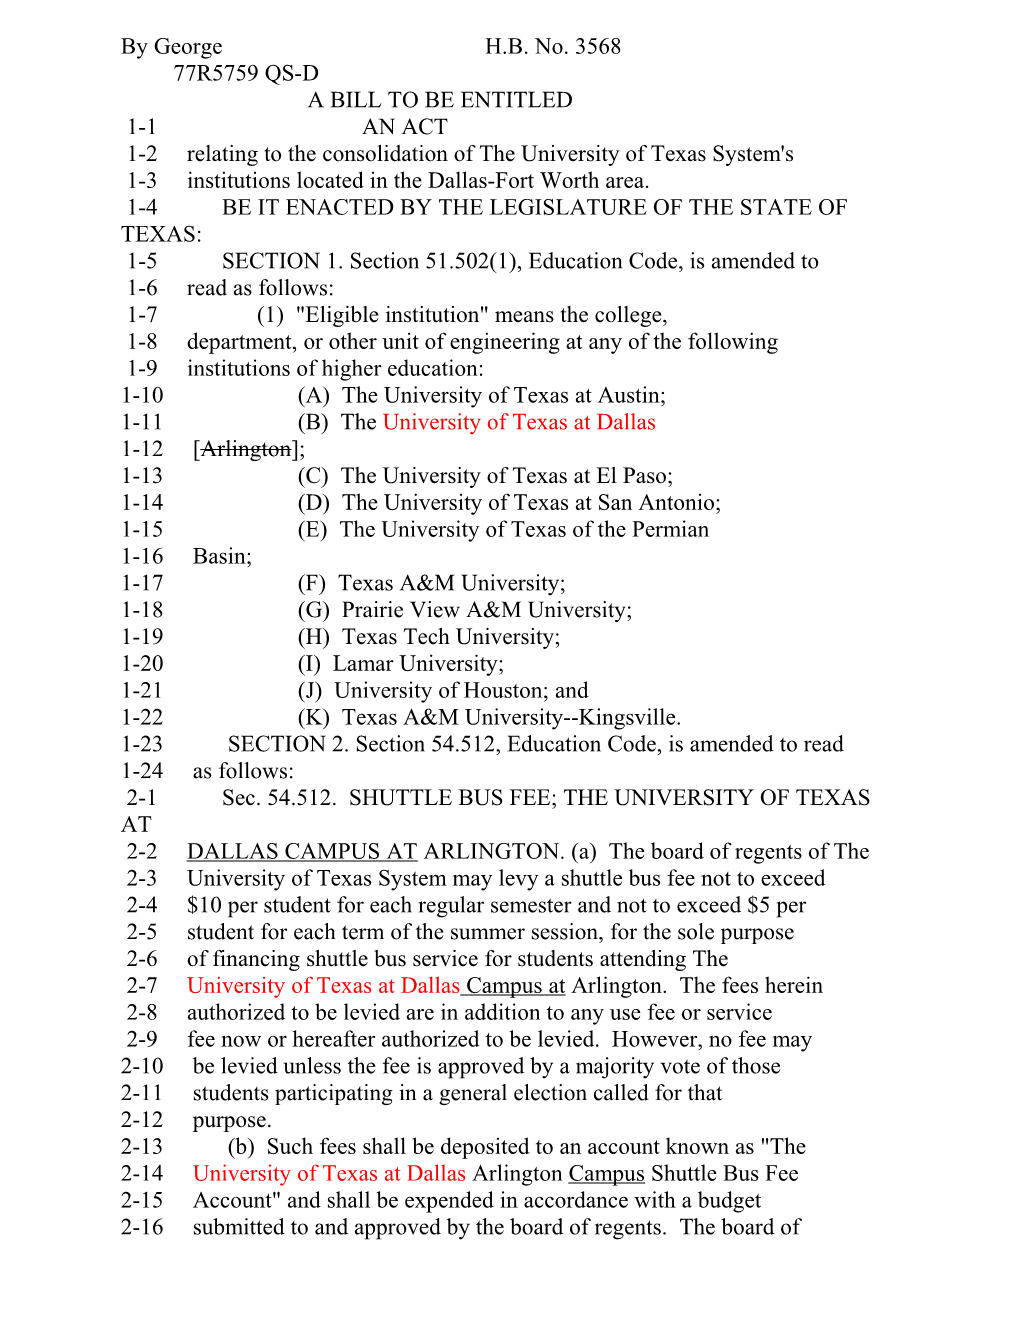 1-2 Relating to the Consolidation of the University of Texas System's